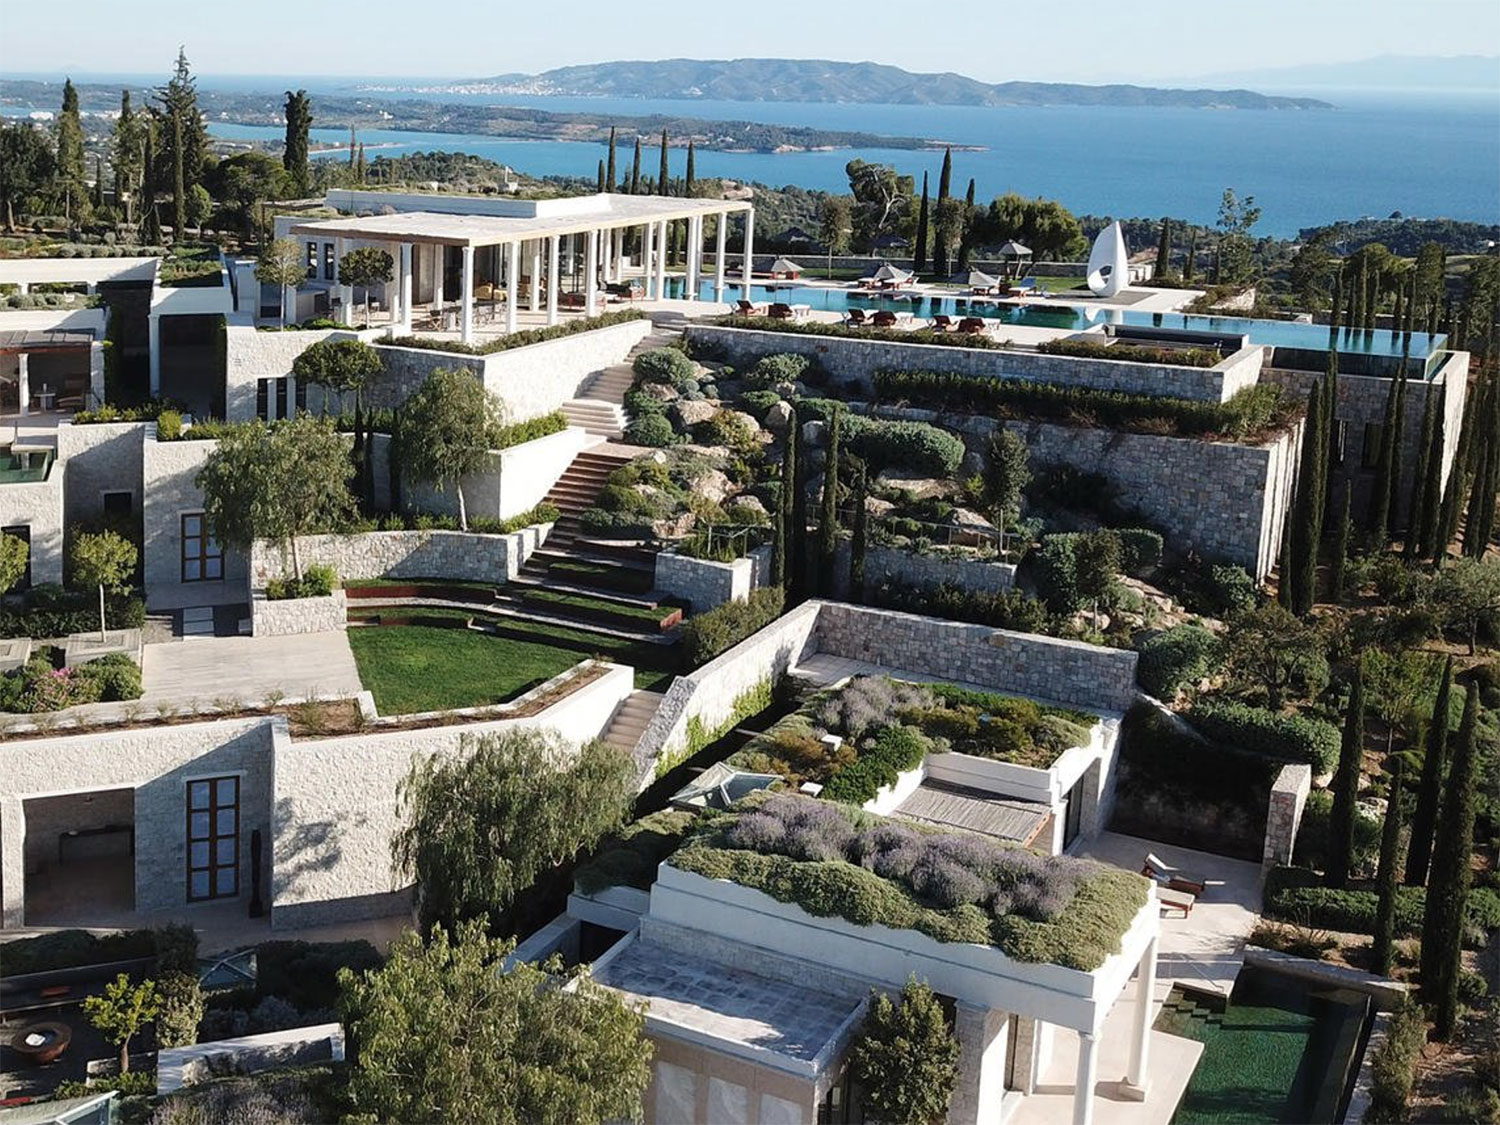 View of Amanzoe's Villa 20 property with the Aegean Sea in the background.